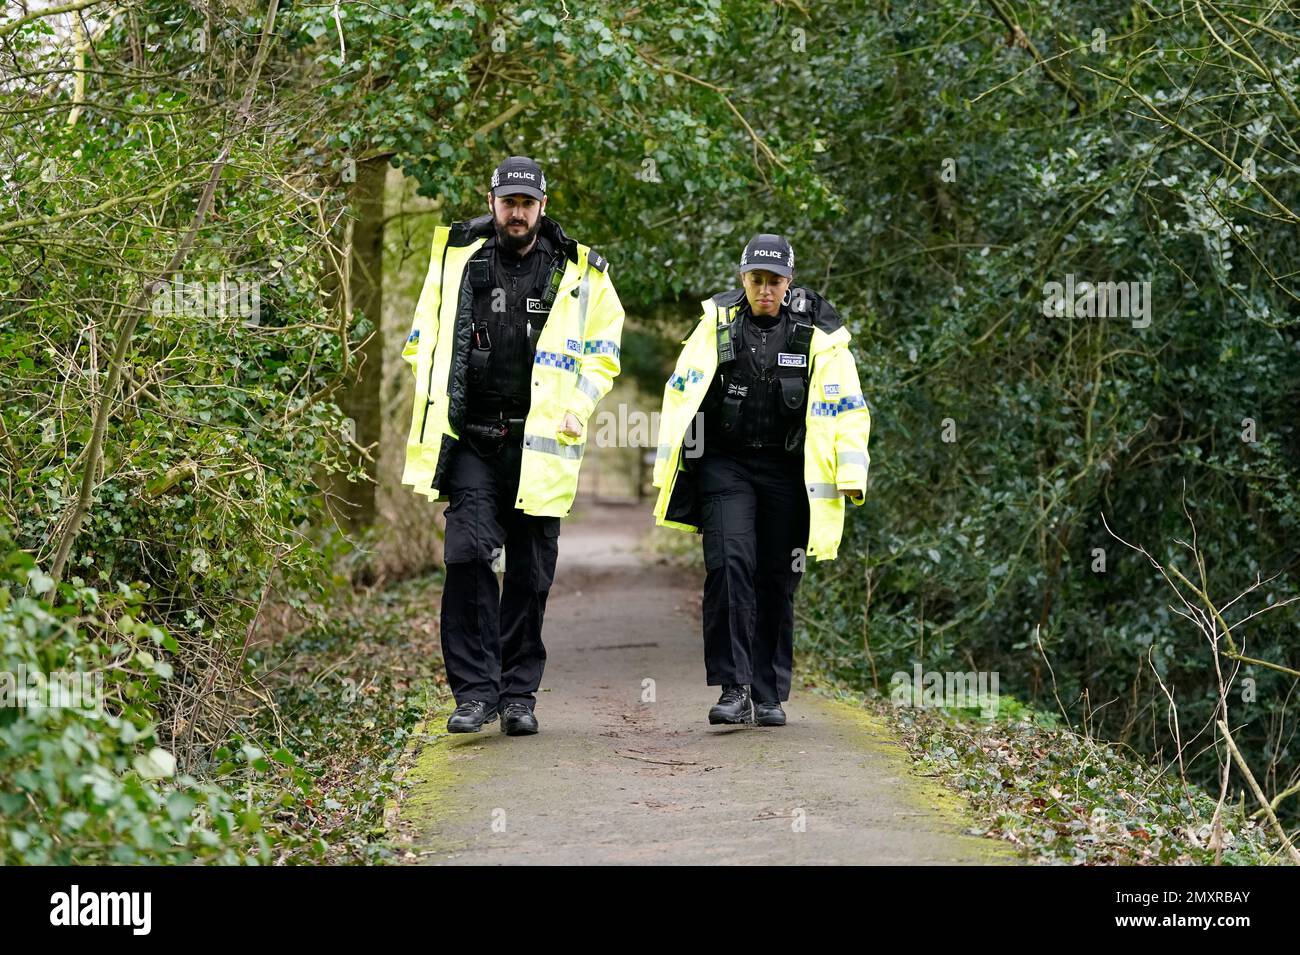 Police officers in St Michael's on Wyre, Lancashire, as police continue their search for missing woman Nicola Bulley, 45, who was last seen on the morning of Friday January 27, when she was spotted walking her dog on a footpath by the nearby River Wyre. Picture date: Saturday February 4, 2023. Stock Photo